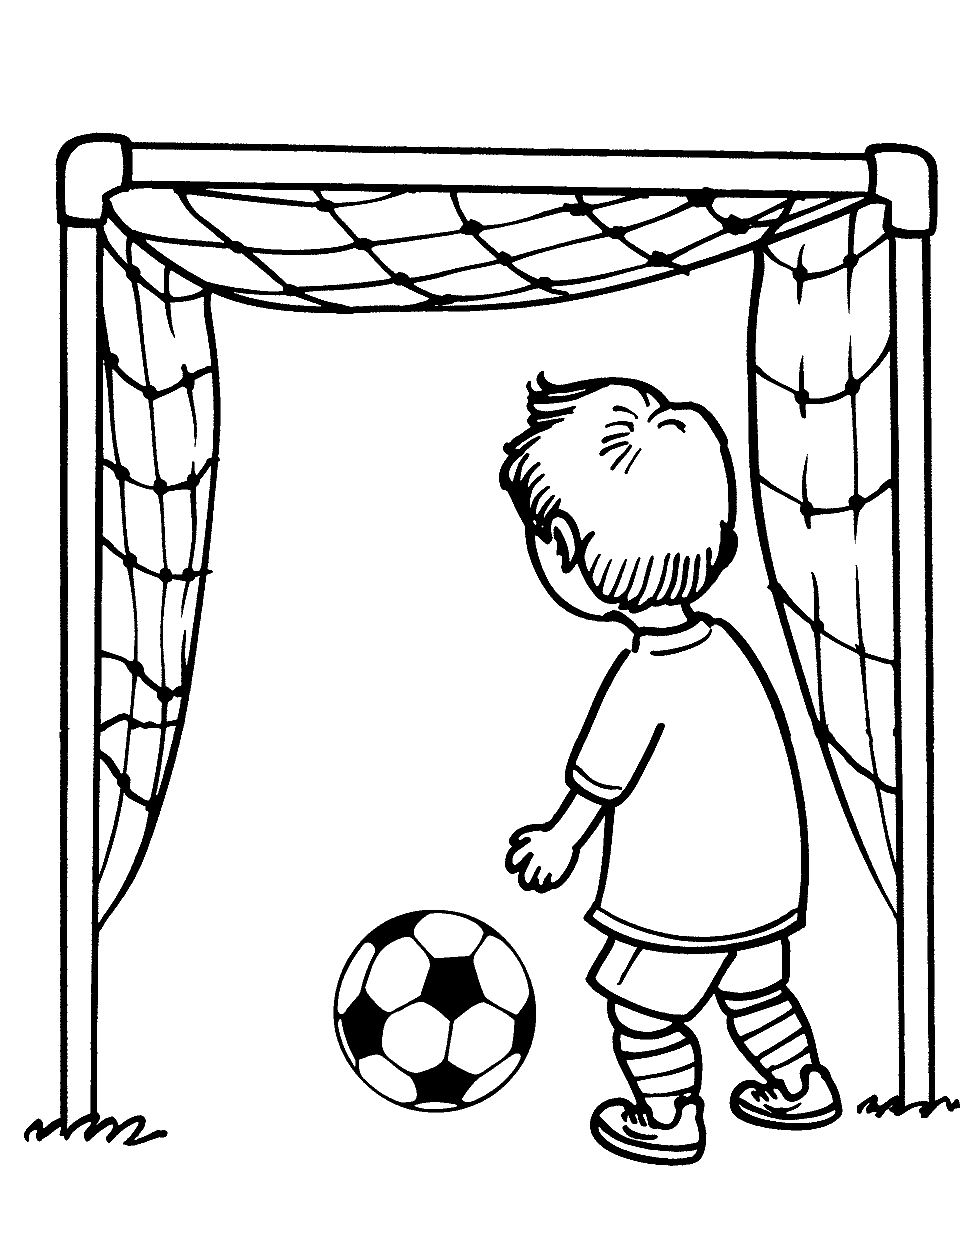 Playing Soccer Coloring Page - A kid playing soccer with a simple goalpost.